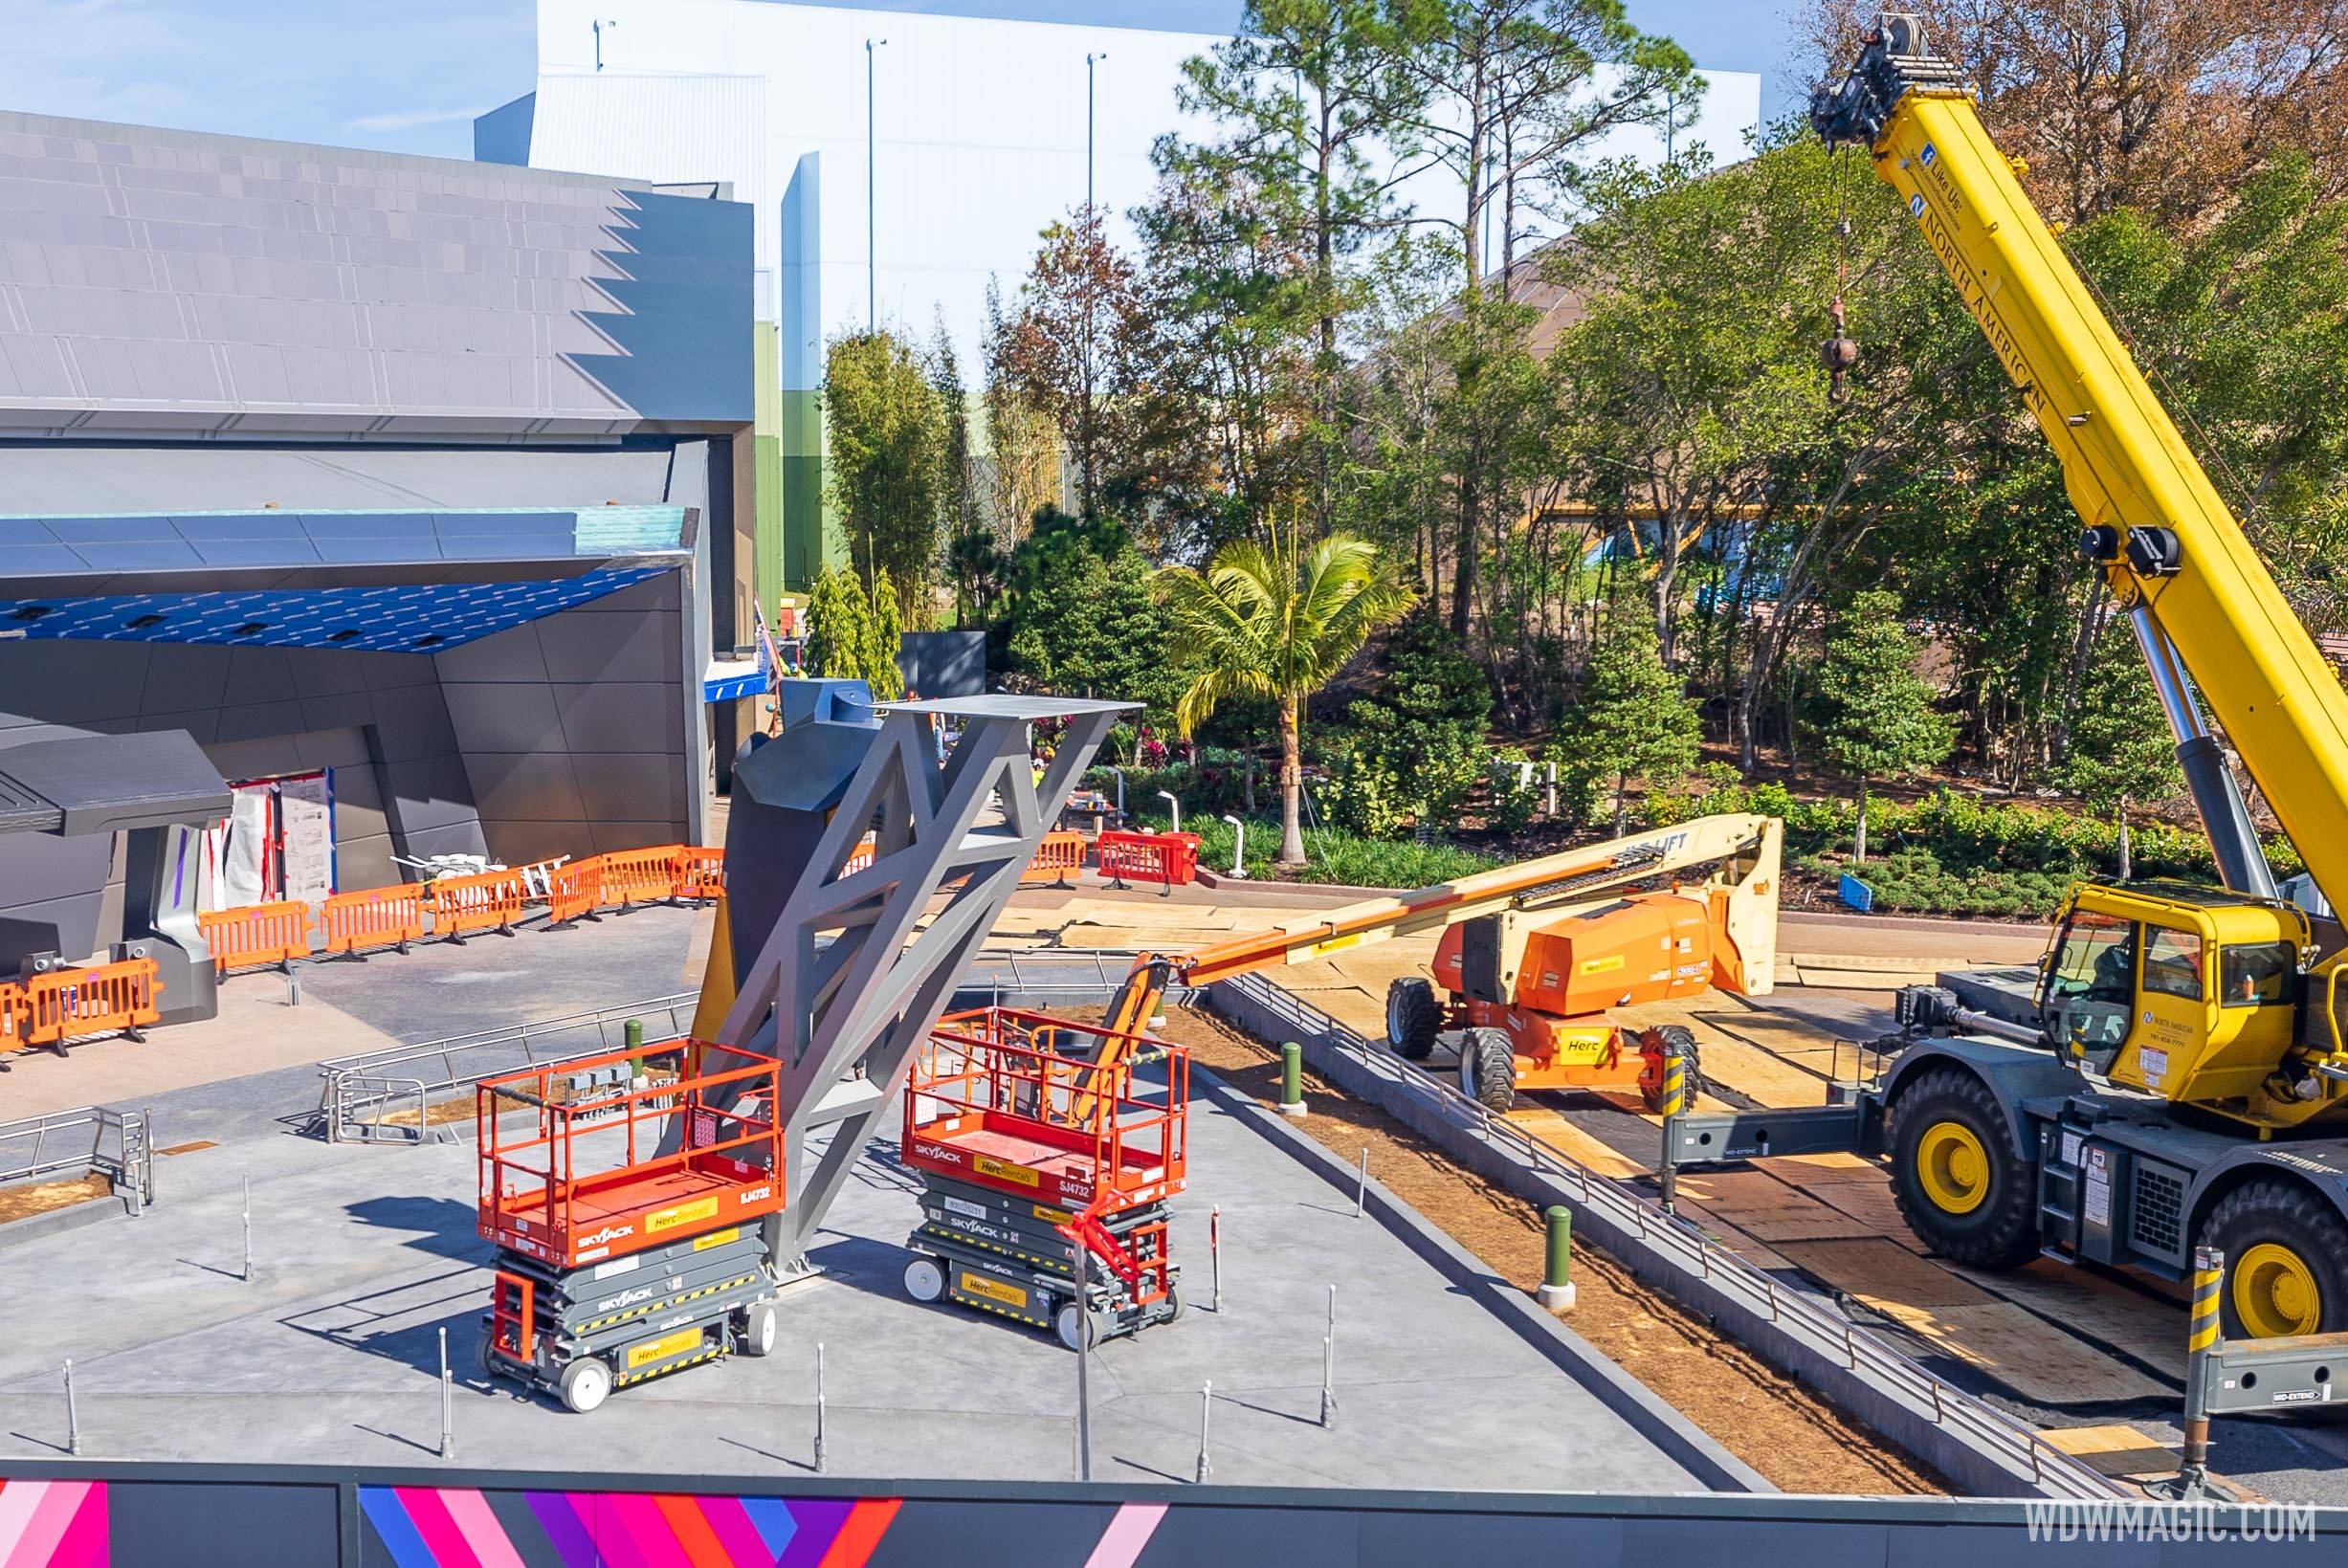 Nova Corps ship installation begins at EPCOT's Guardians of the Galaxy Cosmic Rewind